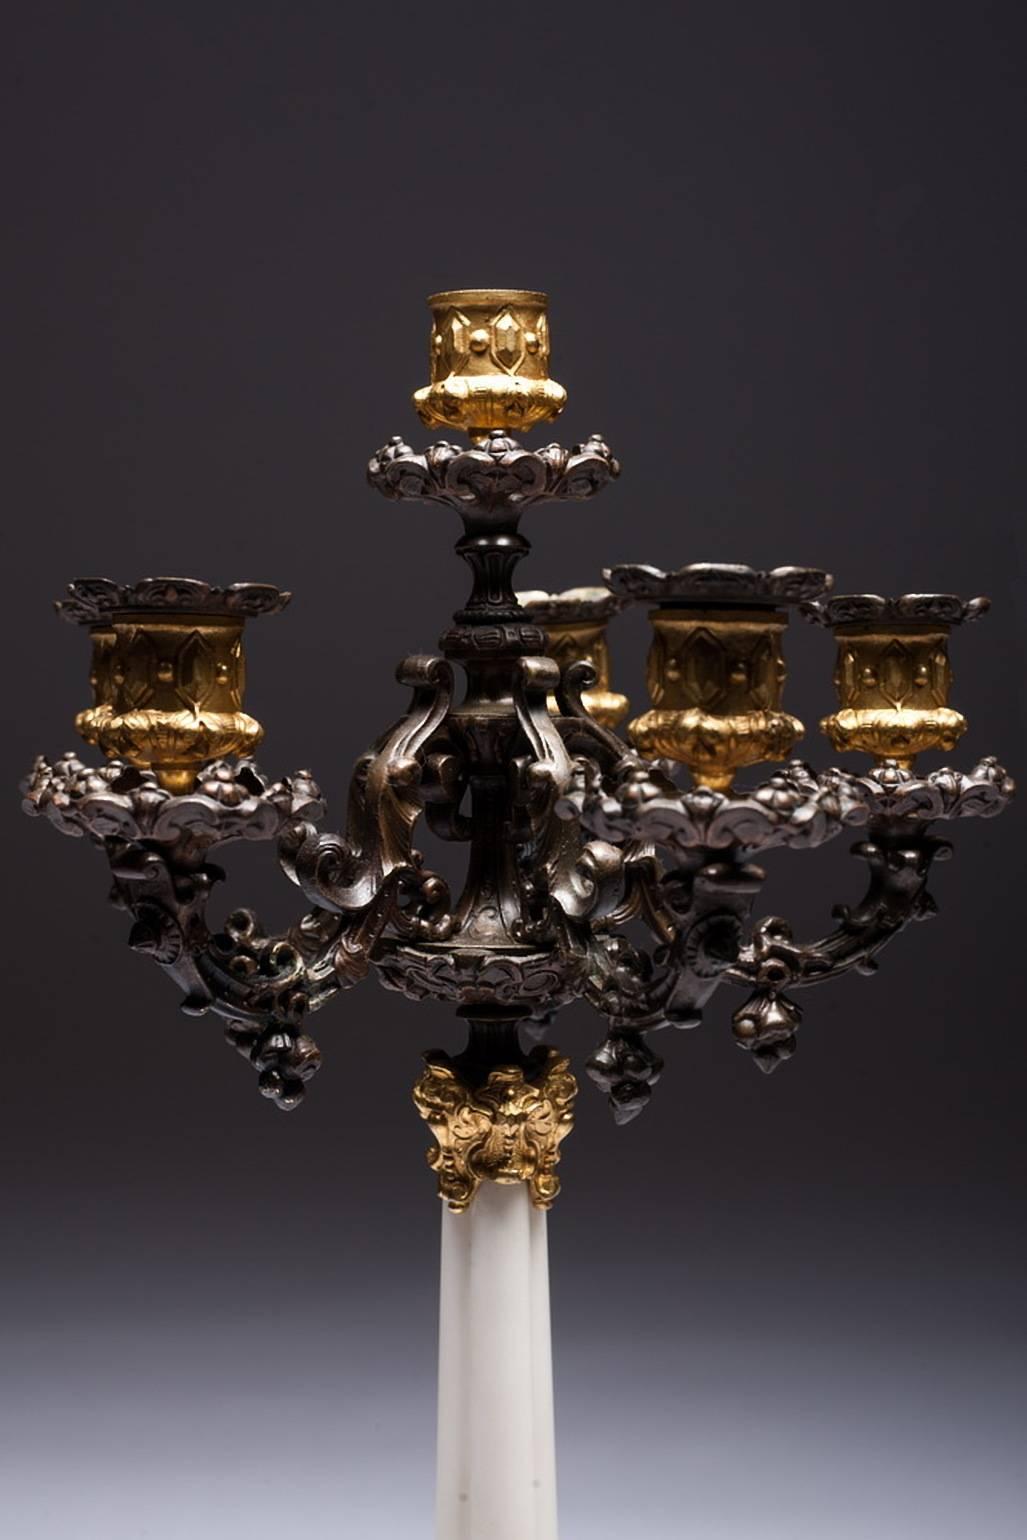 Incredible and rare pair of empire style candelabra of gilt and patinated bronze, central column is made of white marble. Place for six candles in the candelabra. Very well crafted and intricately detailed. Three cherubs are surrounded by a